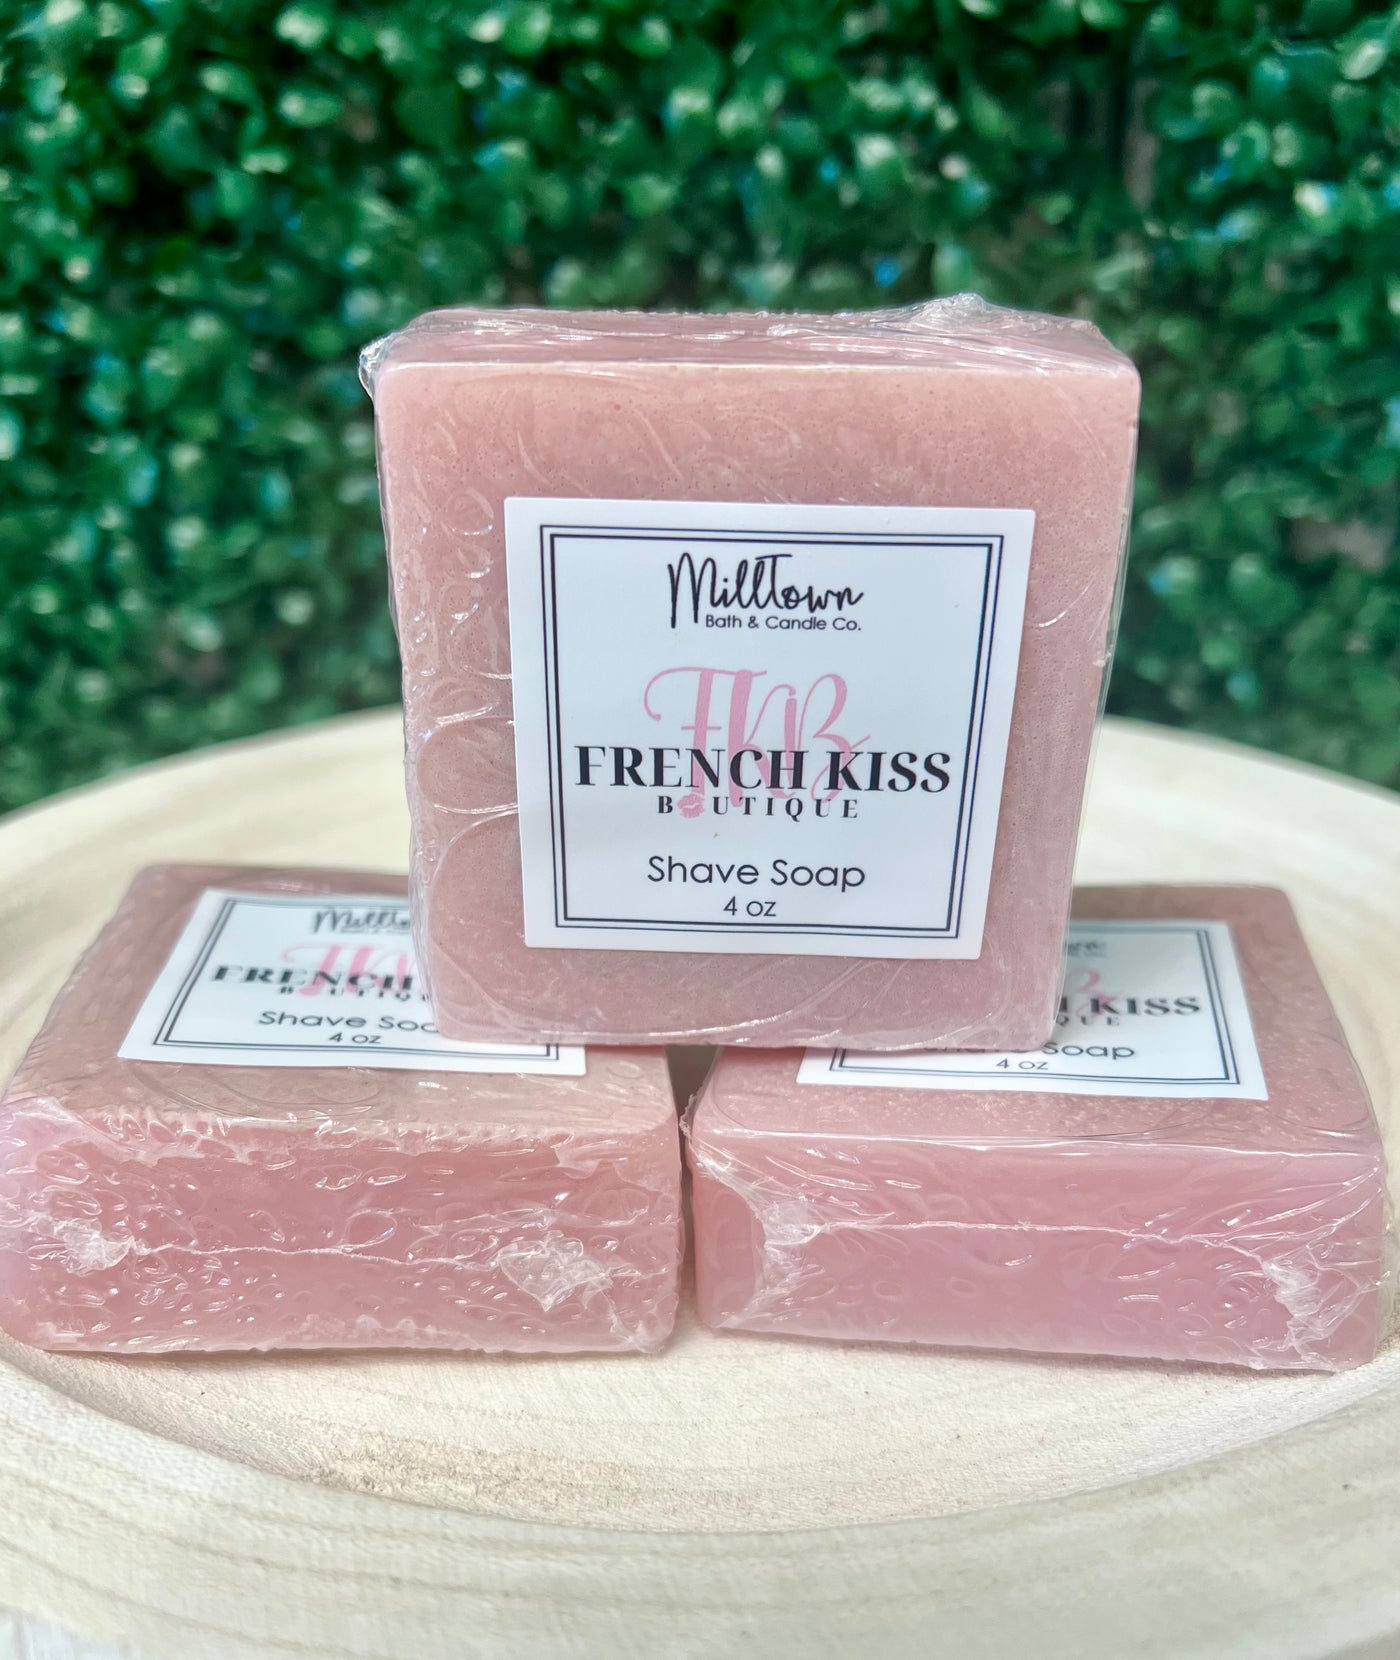 FRENCH KISS EXCLUSIVE SHAVE SOAP